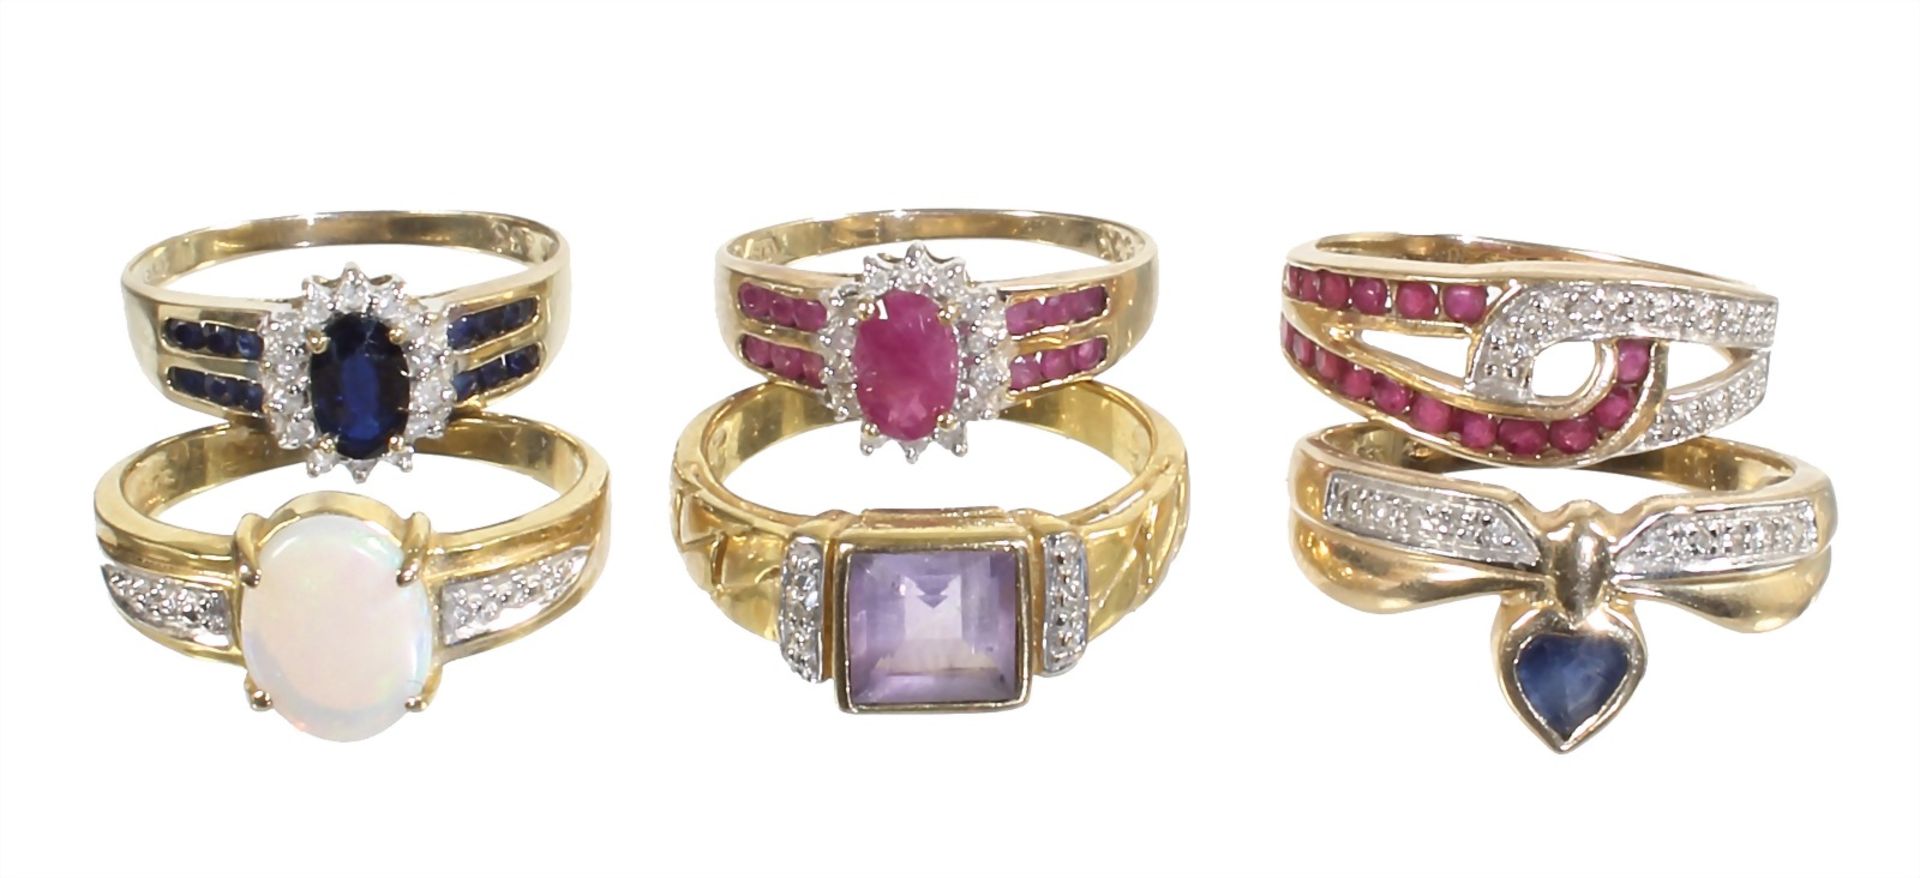 lot: rings (6 pieces):, yelow gold 333/000, 1 opal ring, 2 sapphire rings, 1 amethyst ring and 2